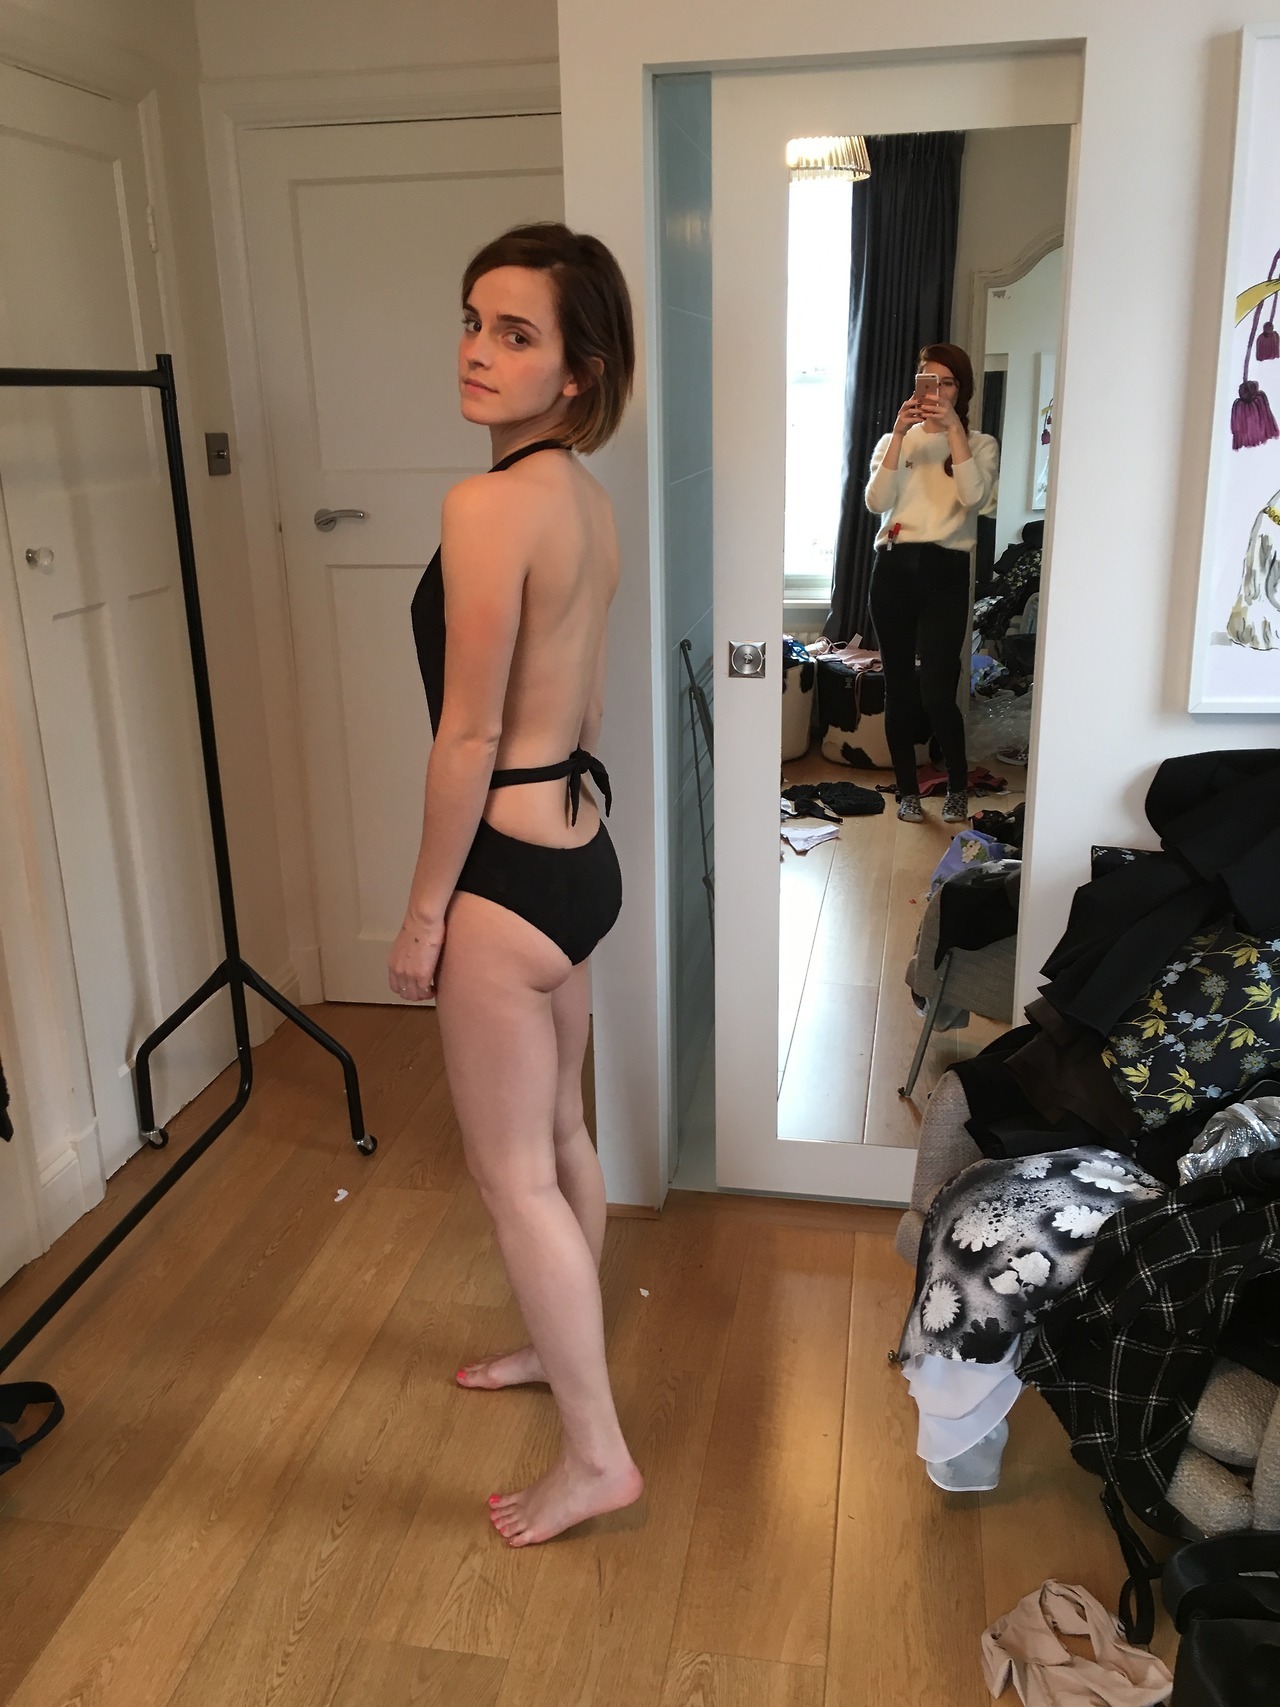 Watson fappening emma The Fappening